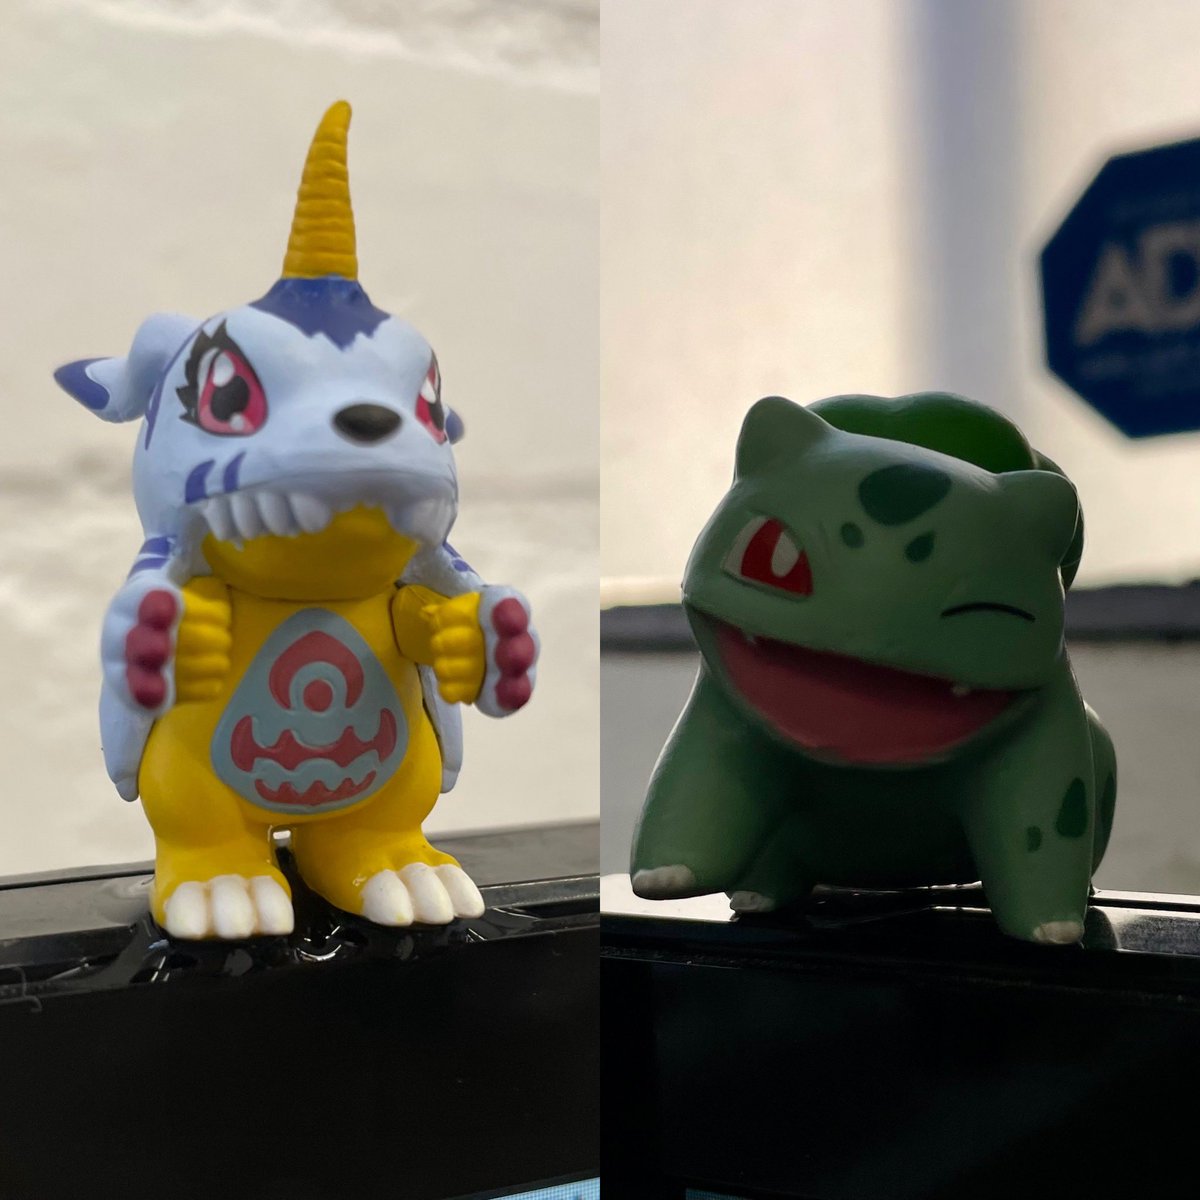 Is it controversial to have one of my favorite Digimon and one of my favorite Pokémon on my work desk together? 😆

#digimonvspokemon #digimon #pokemon #kessentertainment